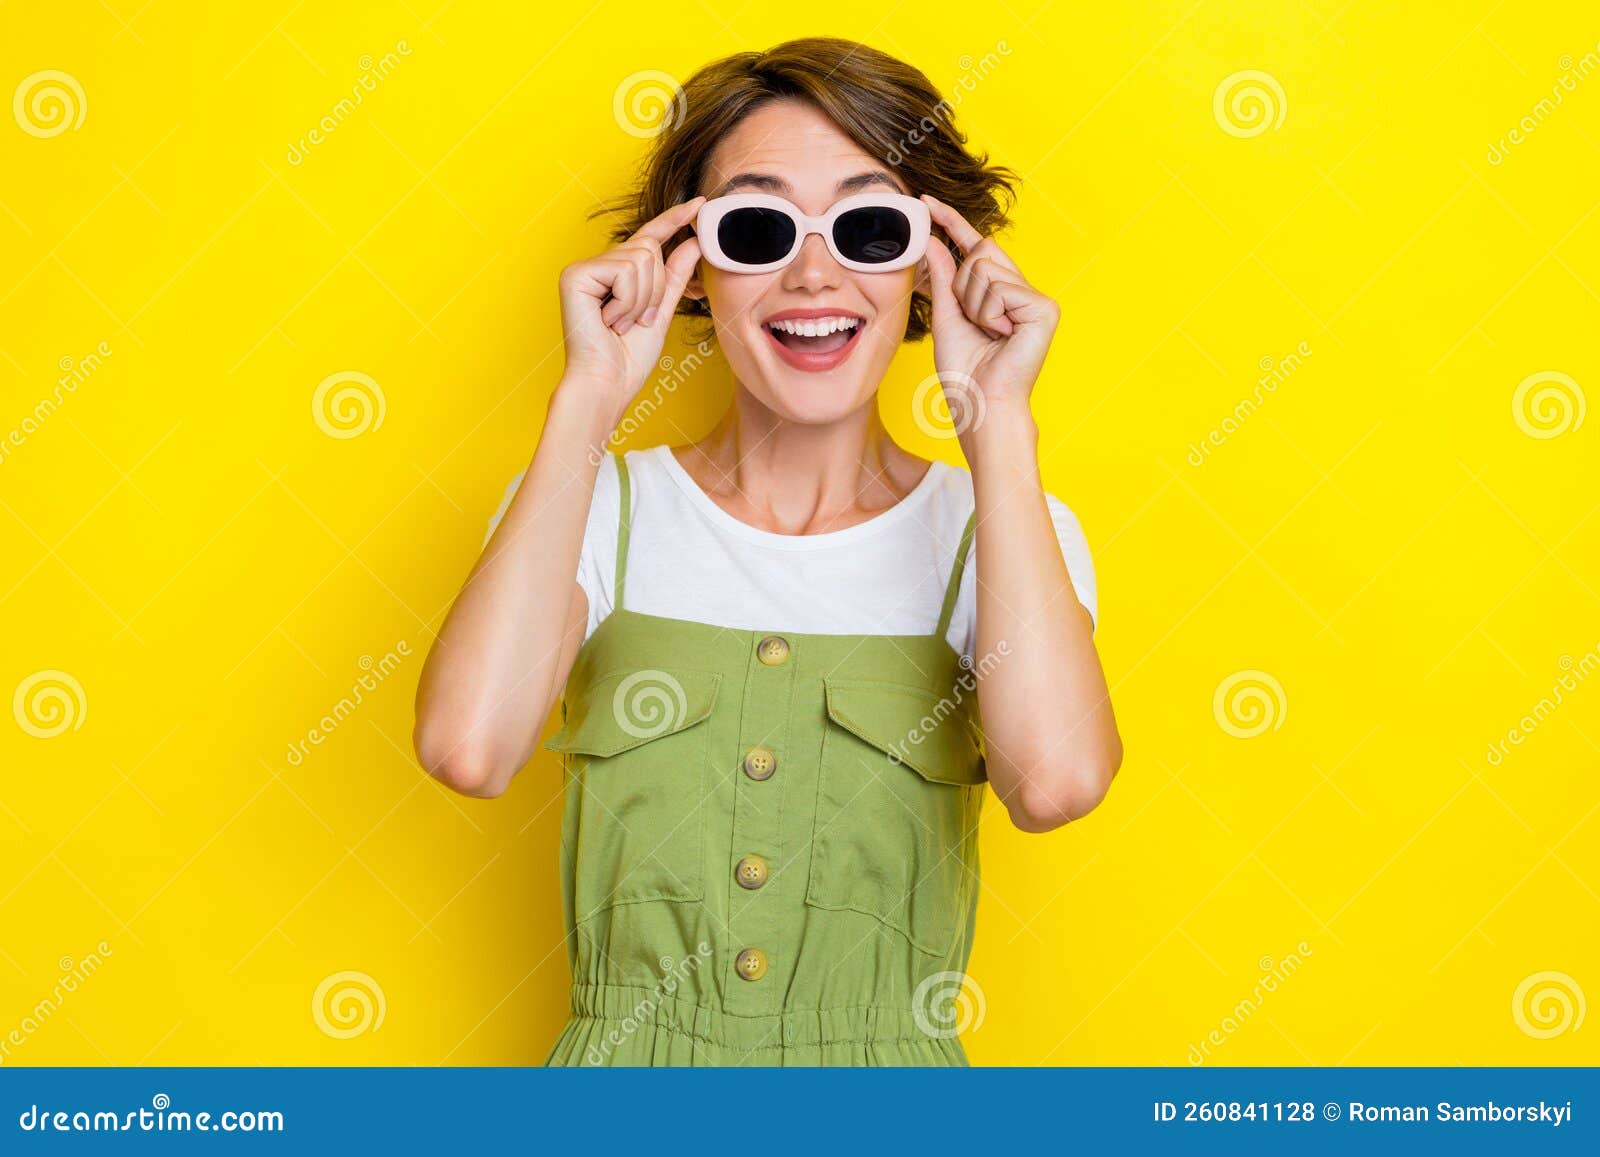 photo of young hipster girl summertime vacation wear sunglasses rayban excited shocked how cool weekend  on